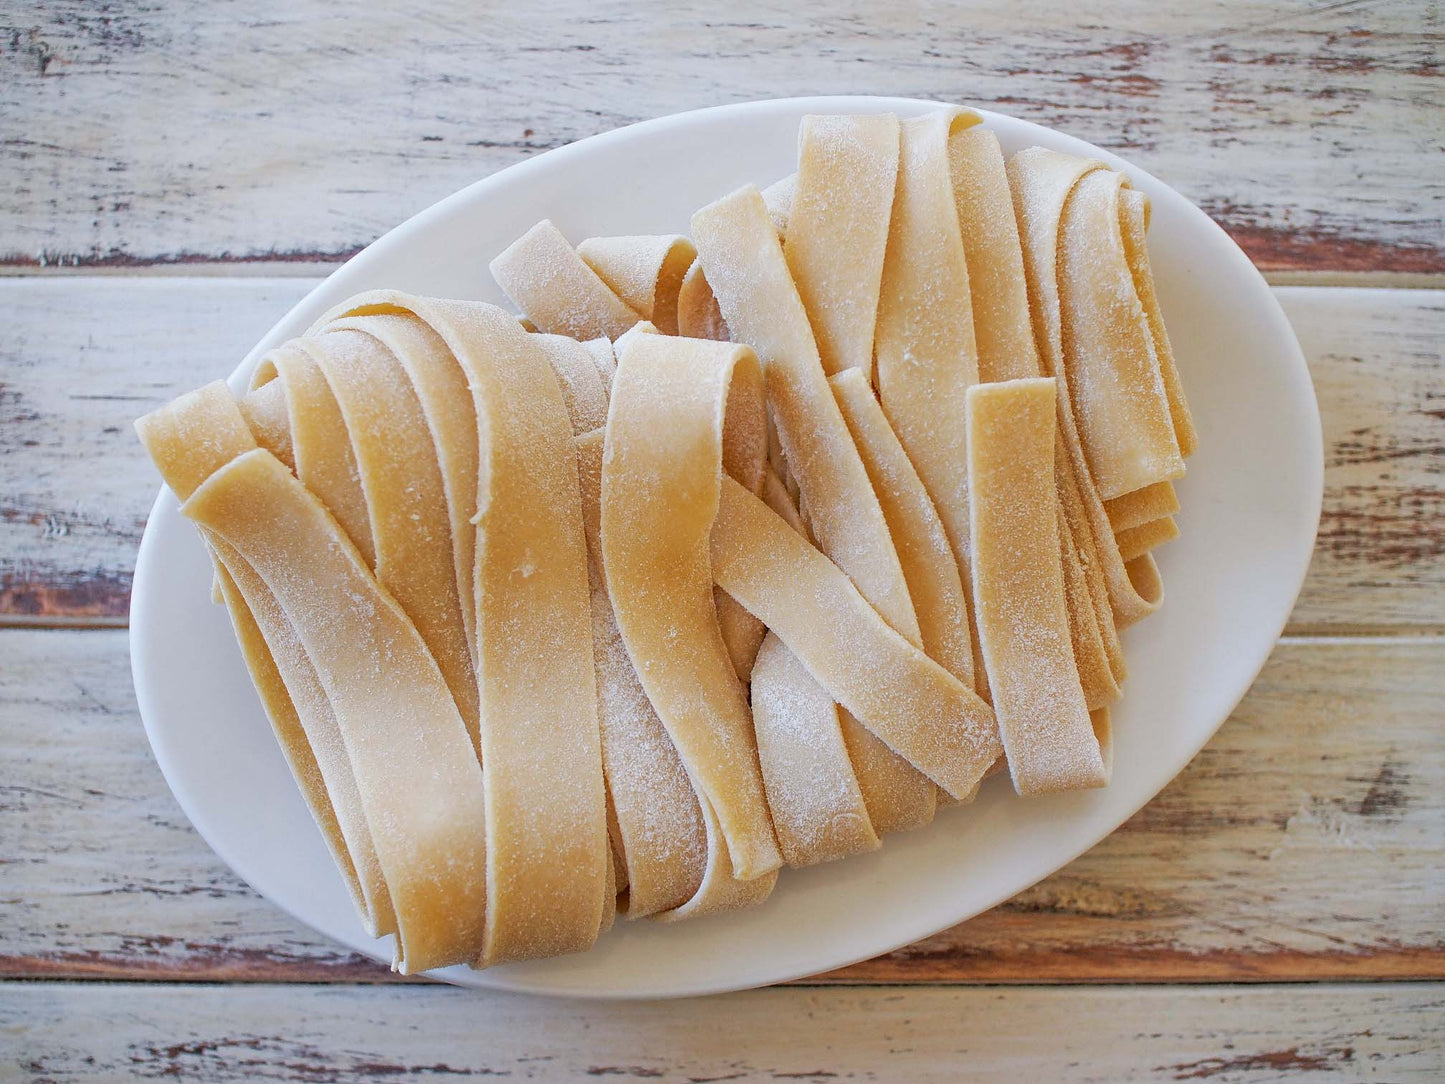 Pappardelle, Artisan-Crafted Gluten-Free – Mariposa Baking Co.